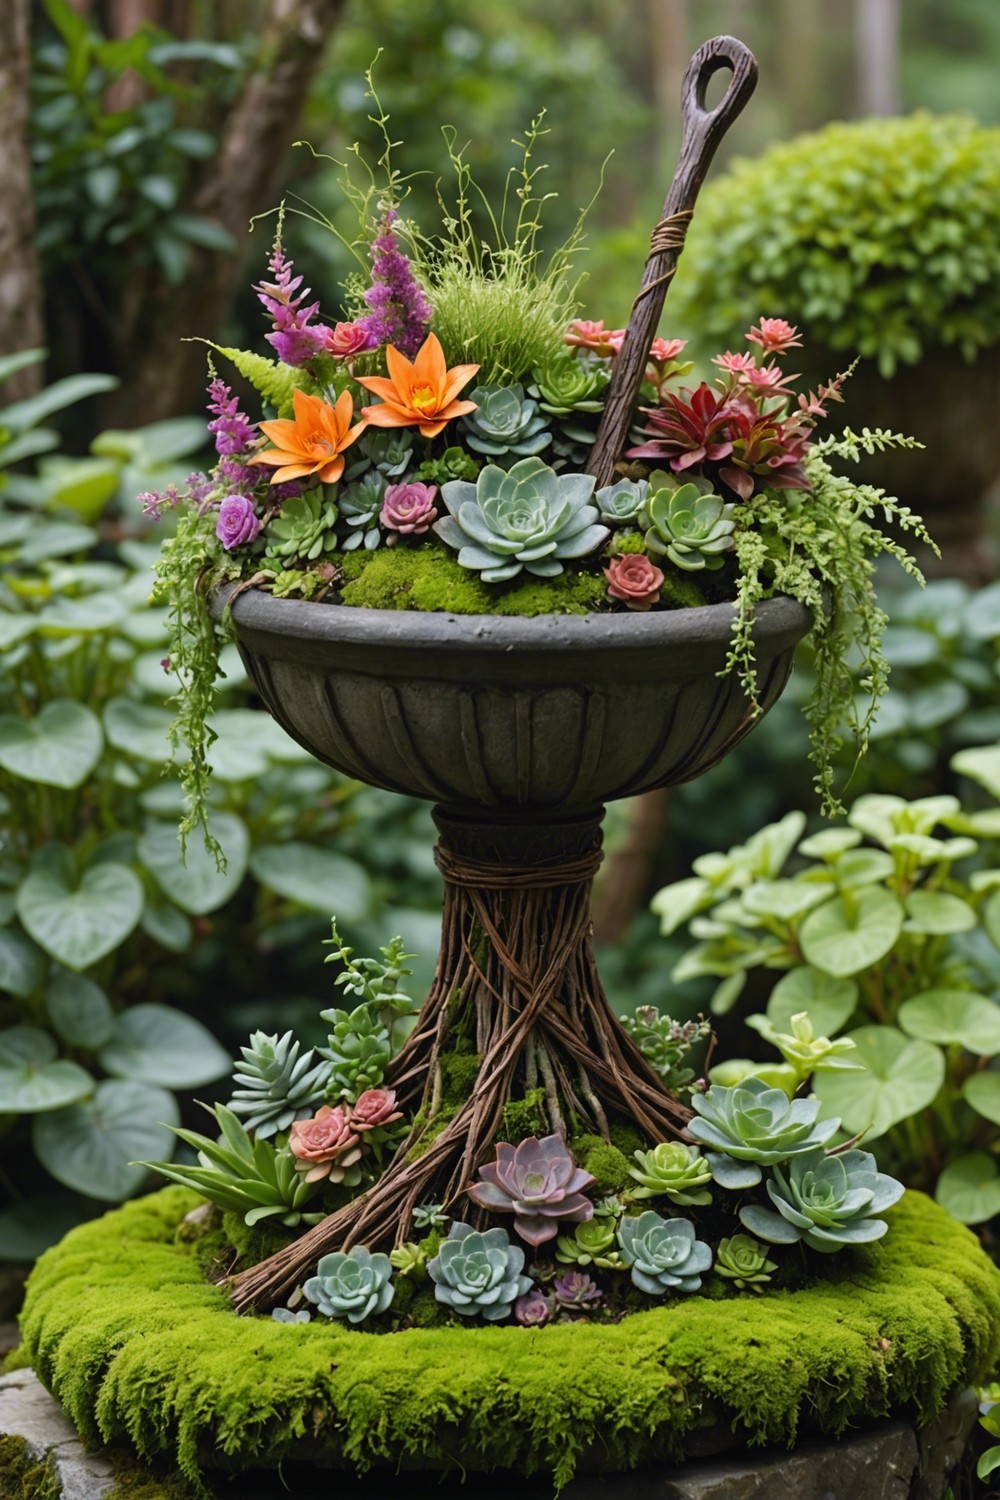 Whimsical Witches' Broom Planters